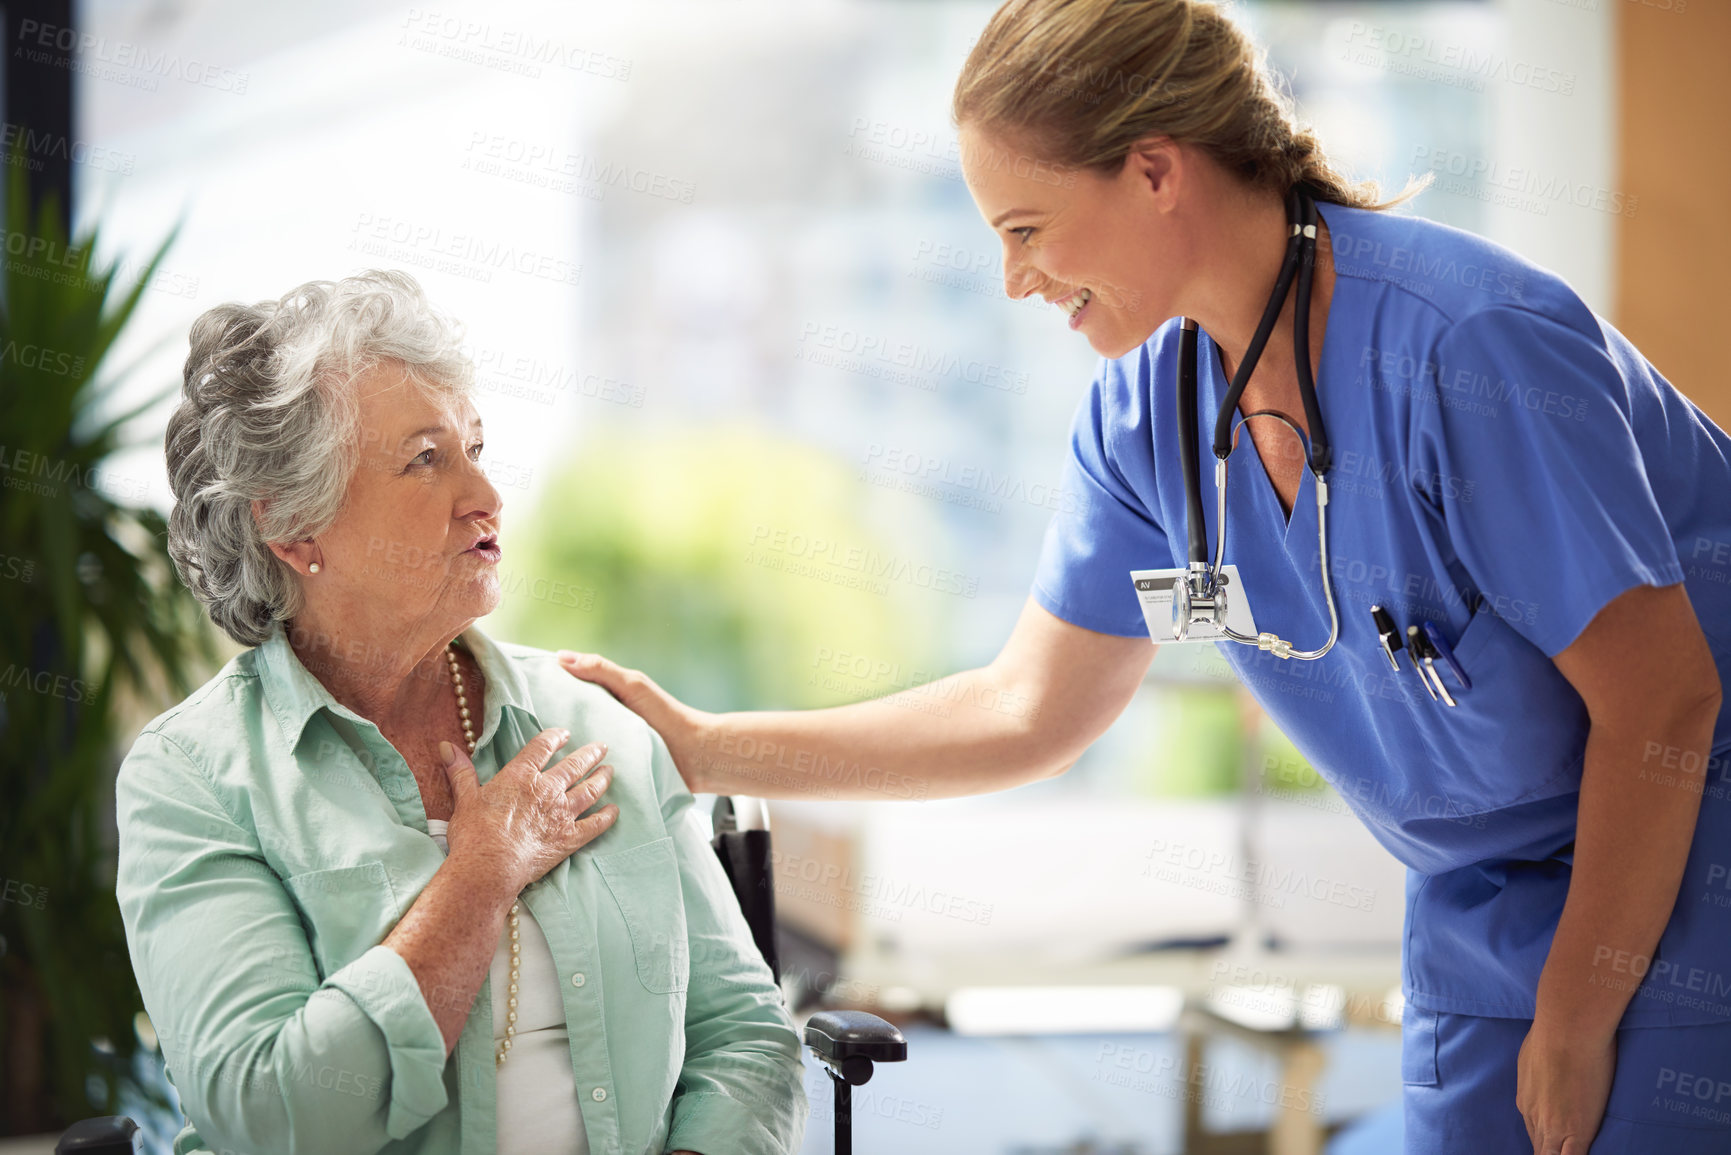 Buy stock photo Shot of a carer at a nursing home with her patient